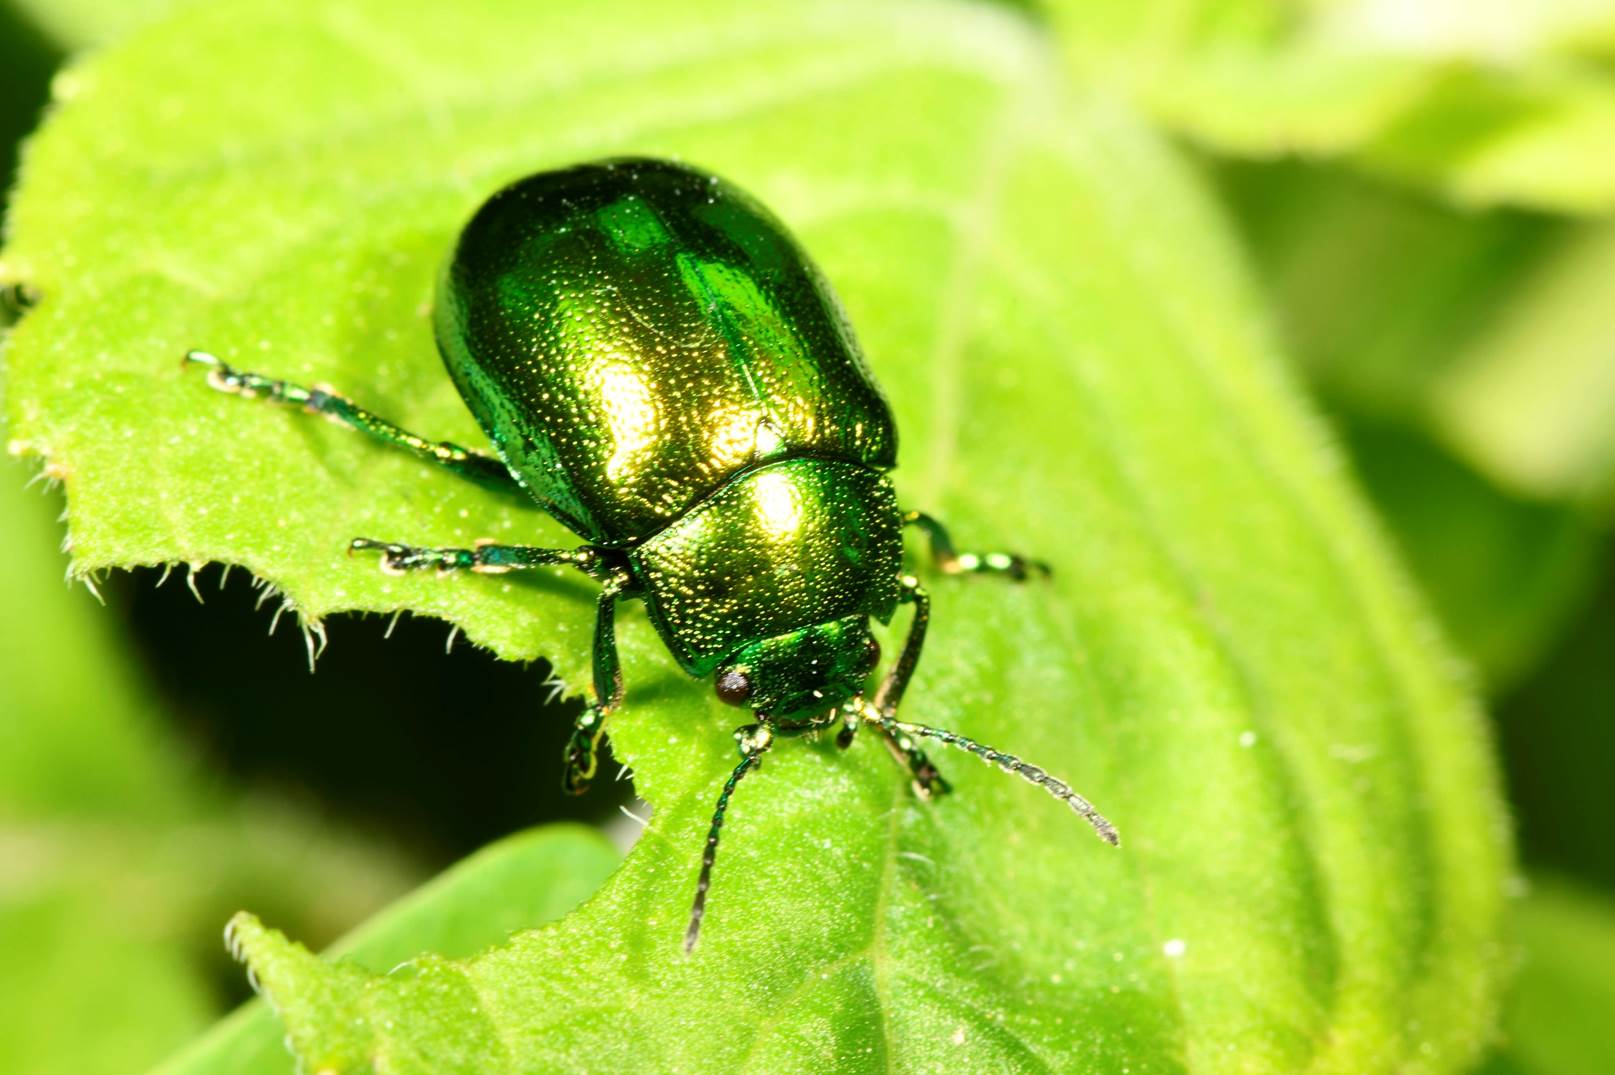 A green bug on a leaf

Description automatically generated with medium confidence